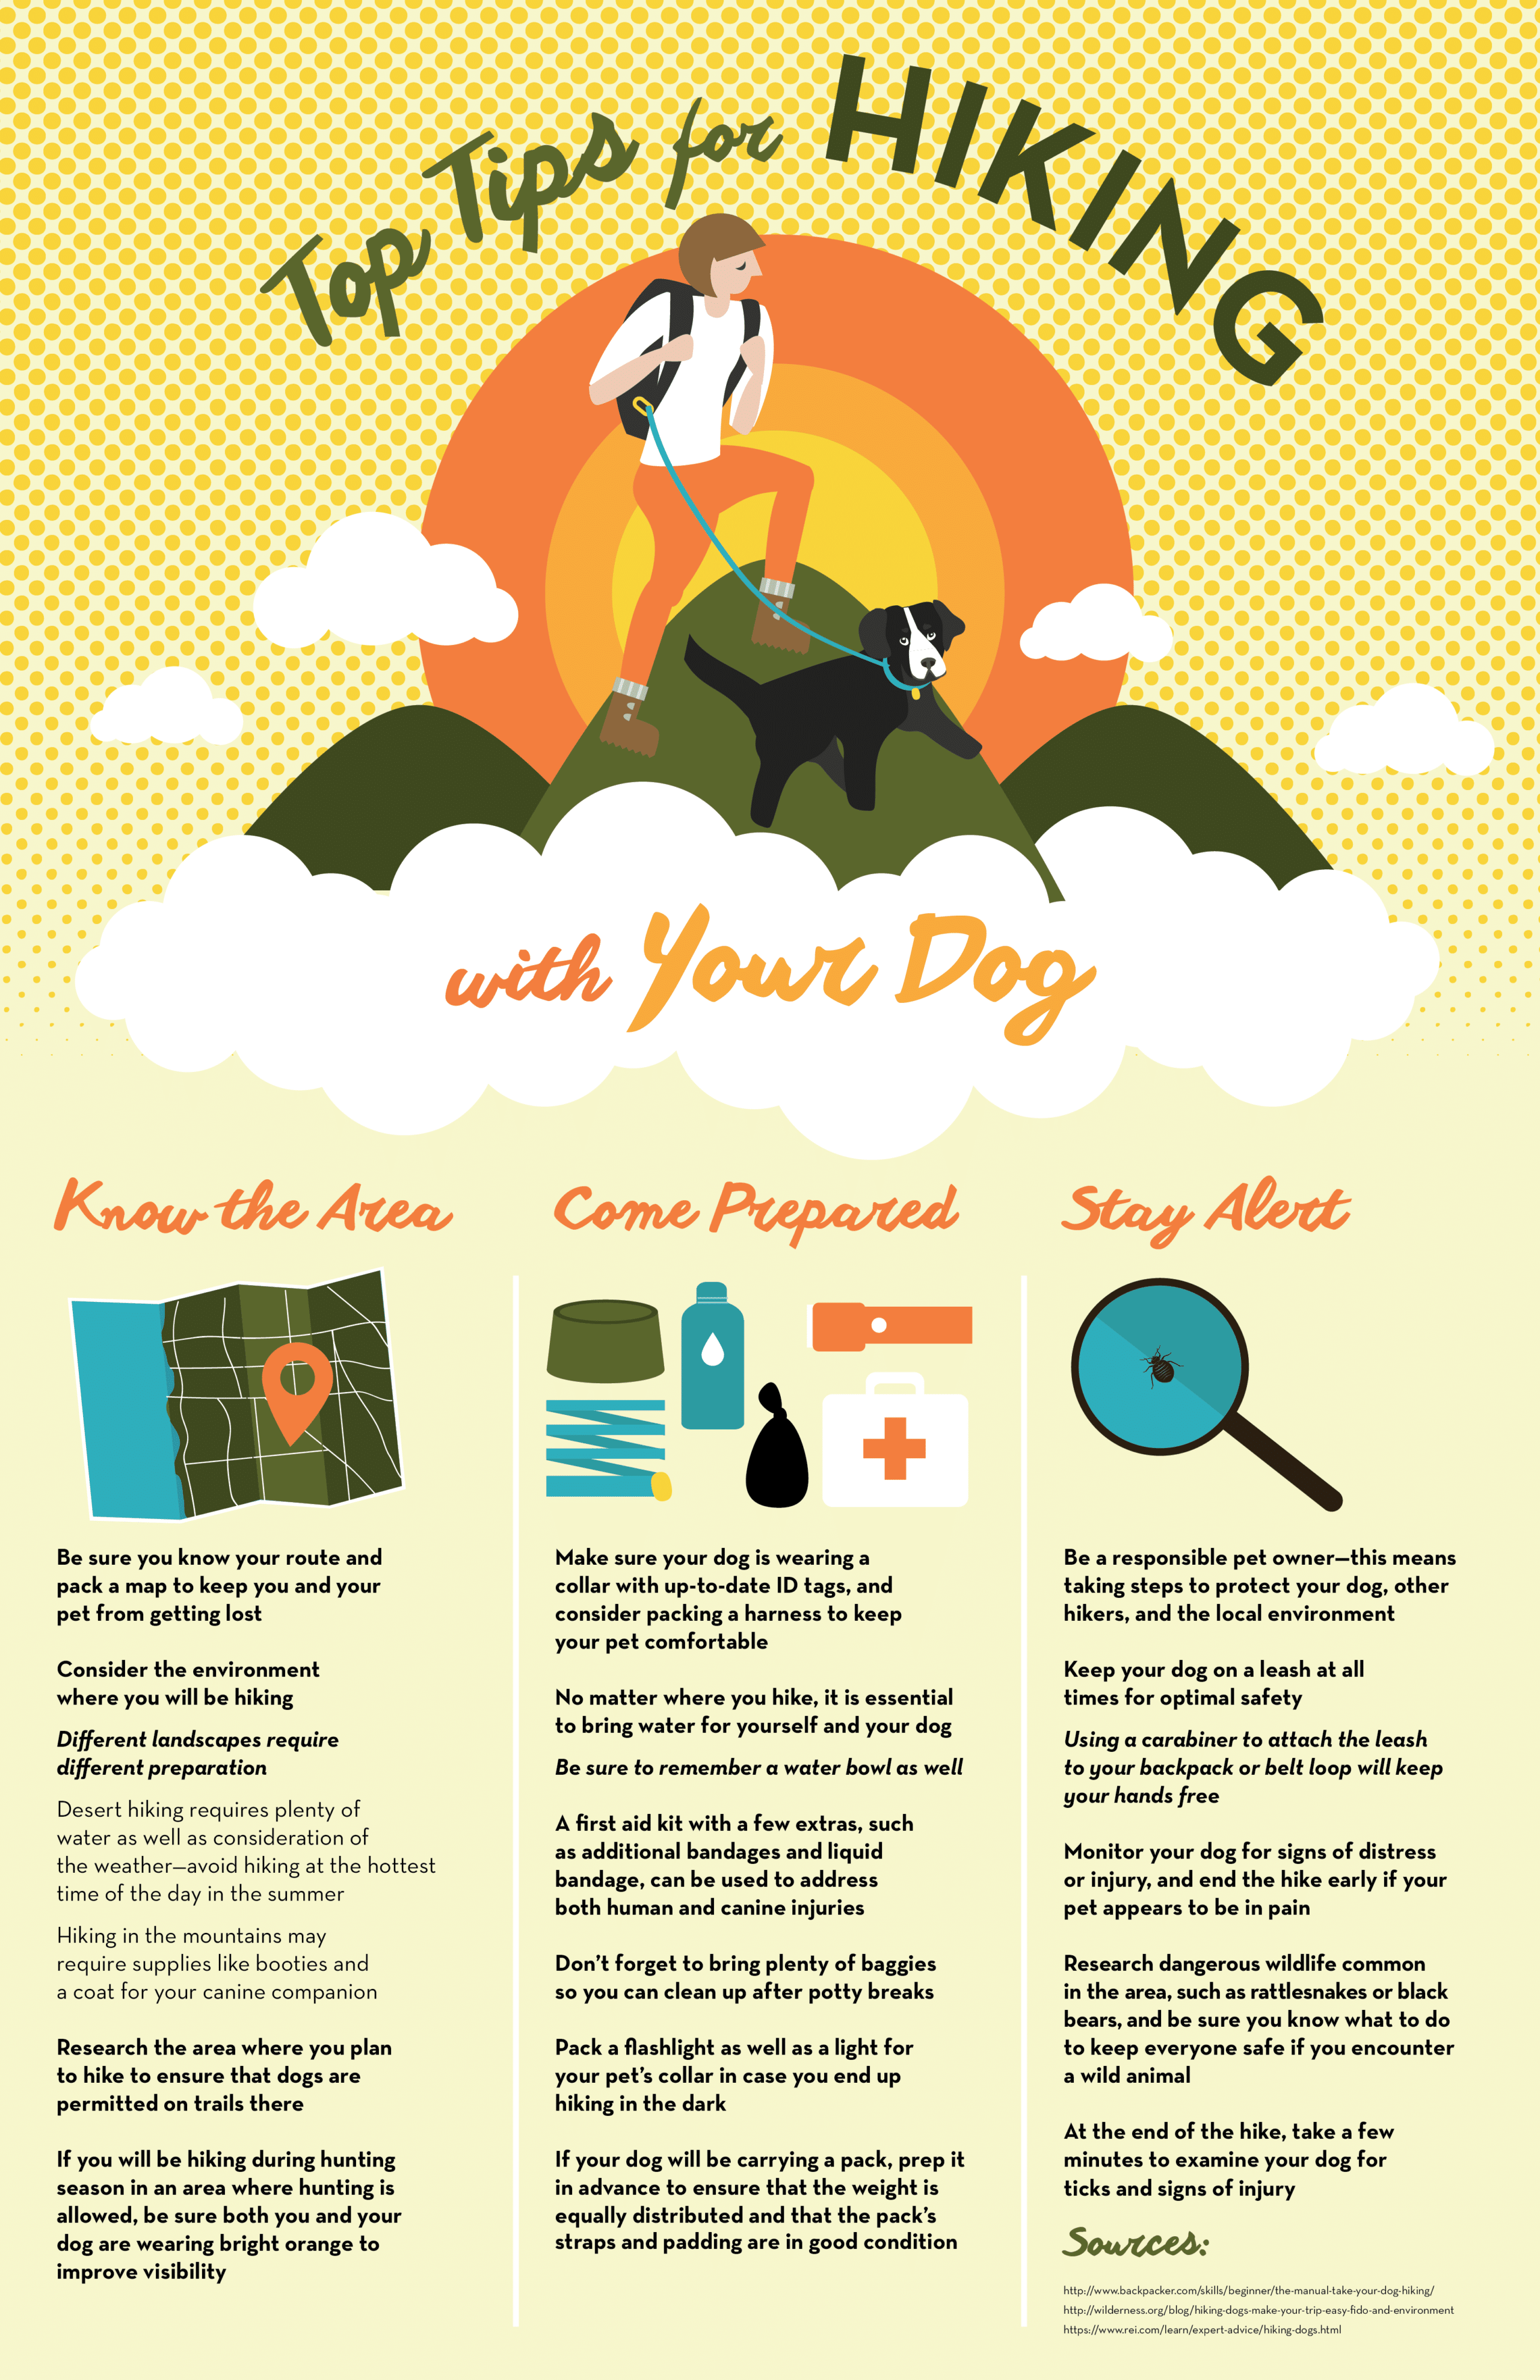 Info sheet with tips for safely hiking with your dog.